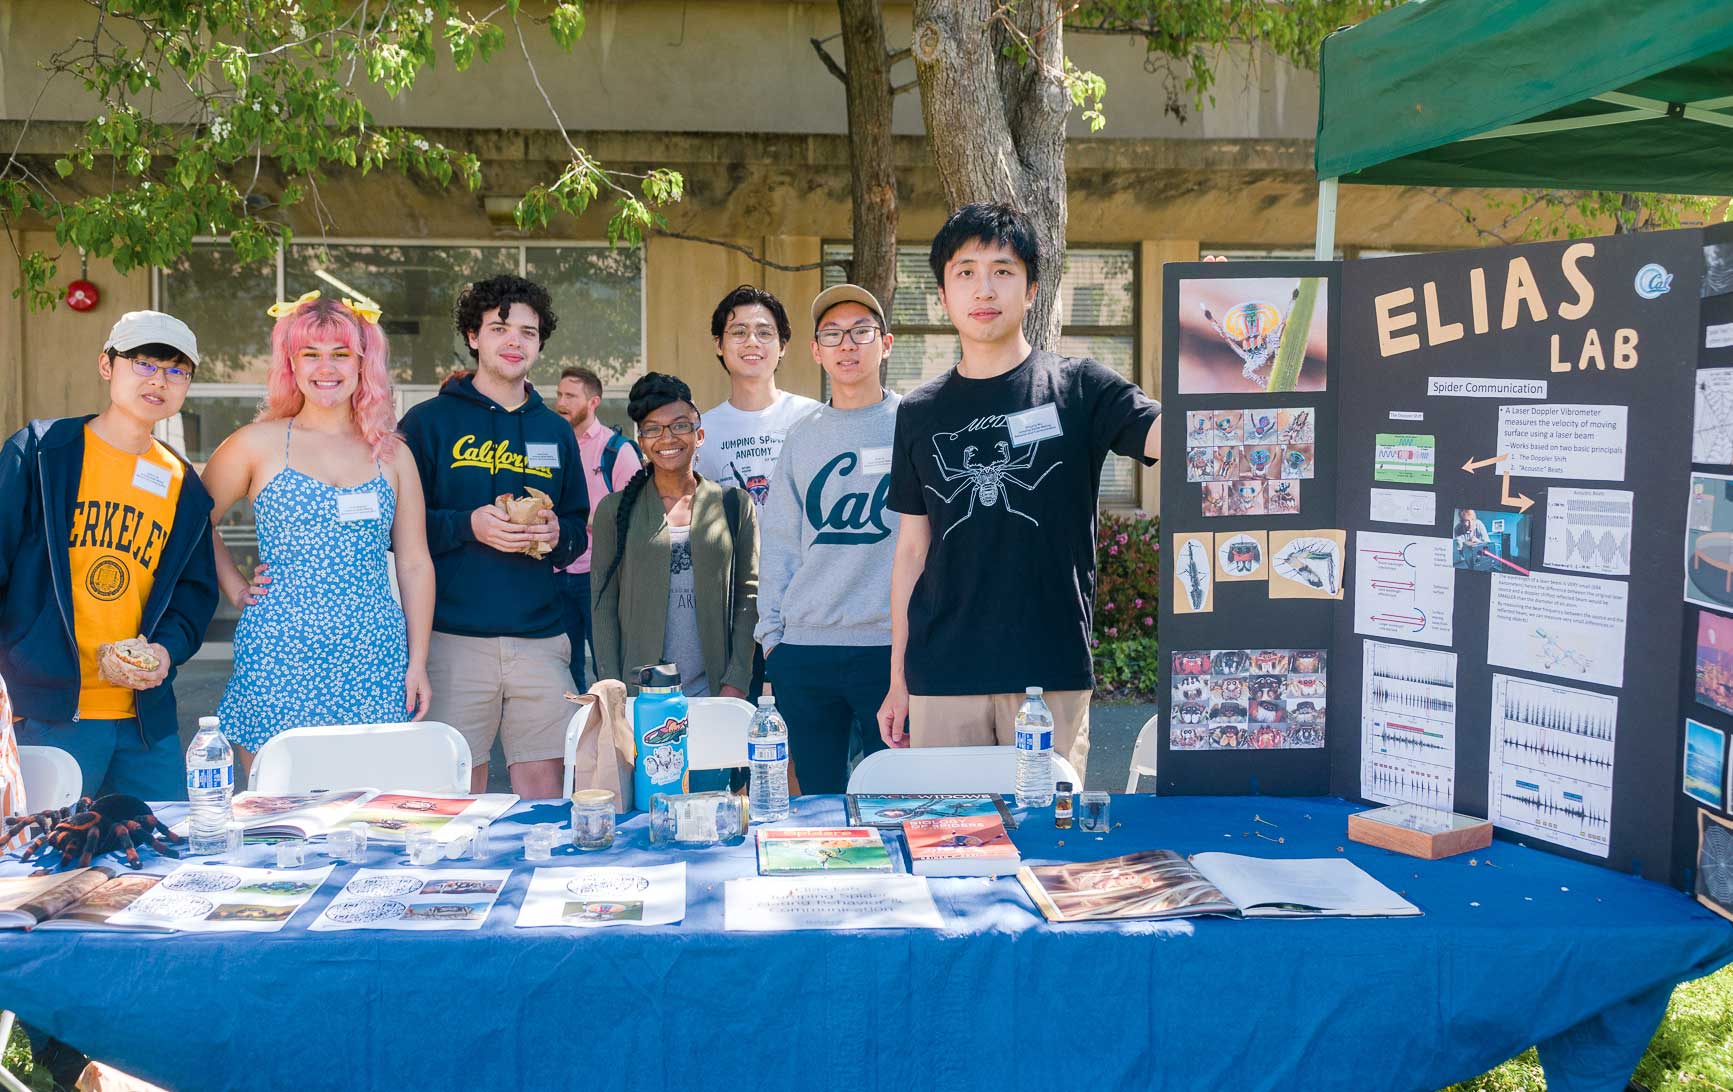 A group of students in Cal gear.